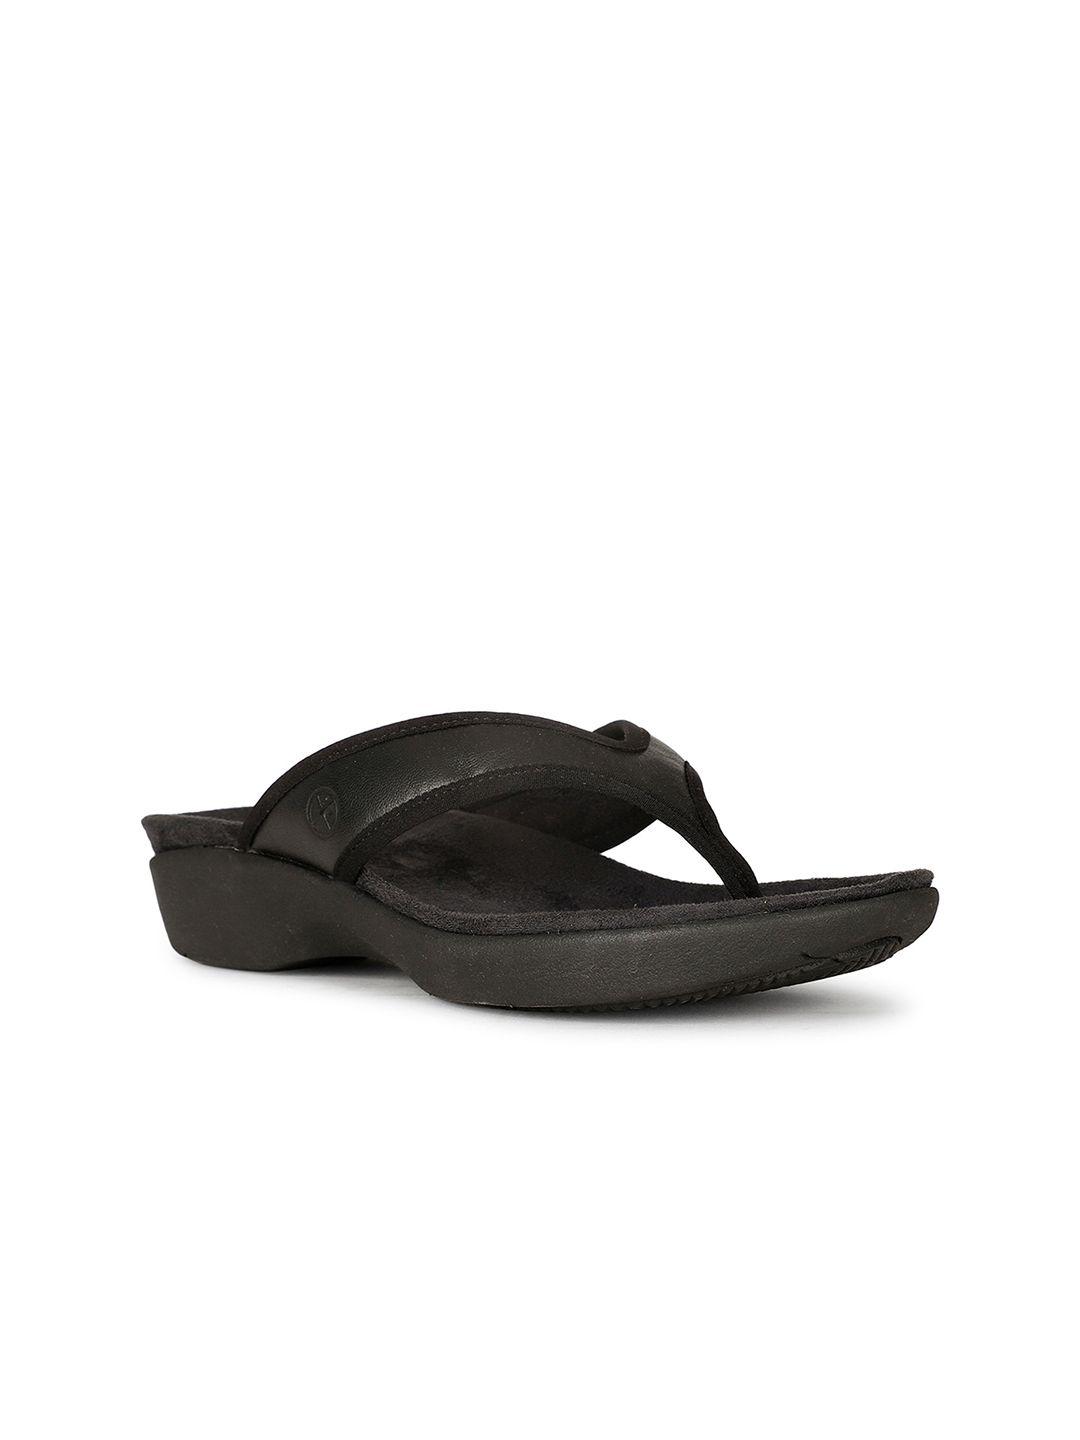 hush puppies thong strap leather open toe flats